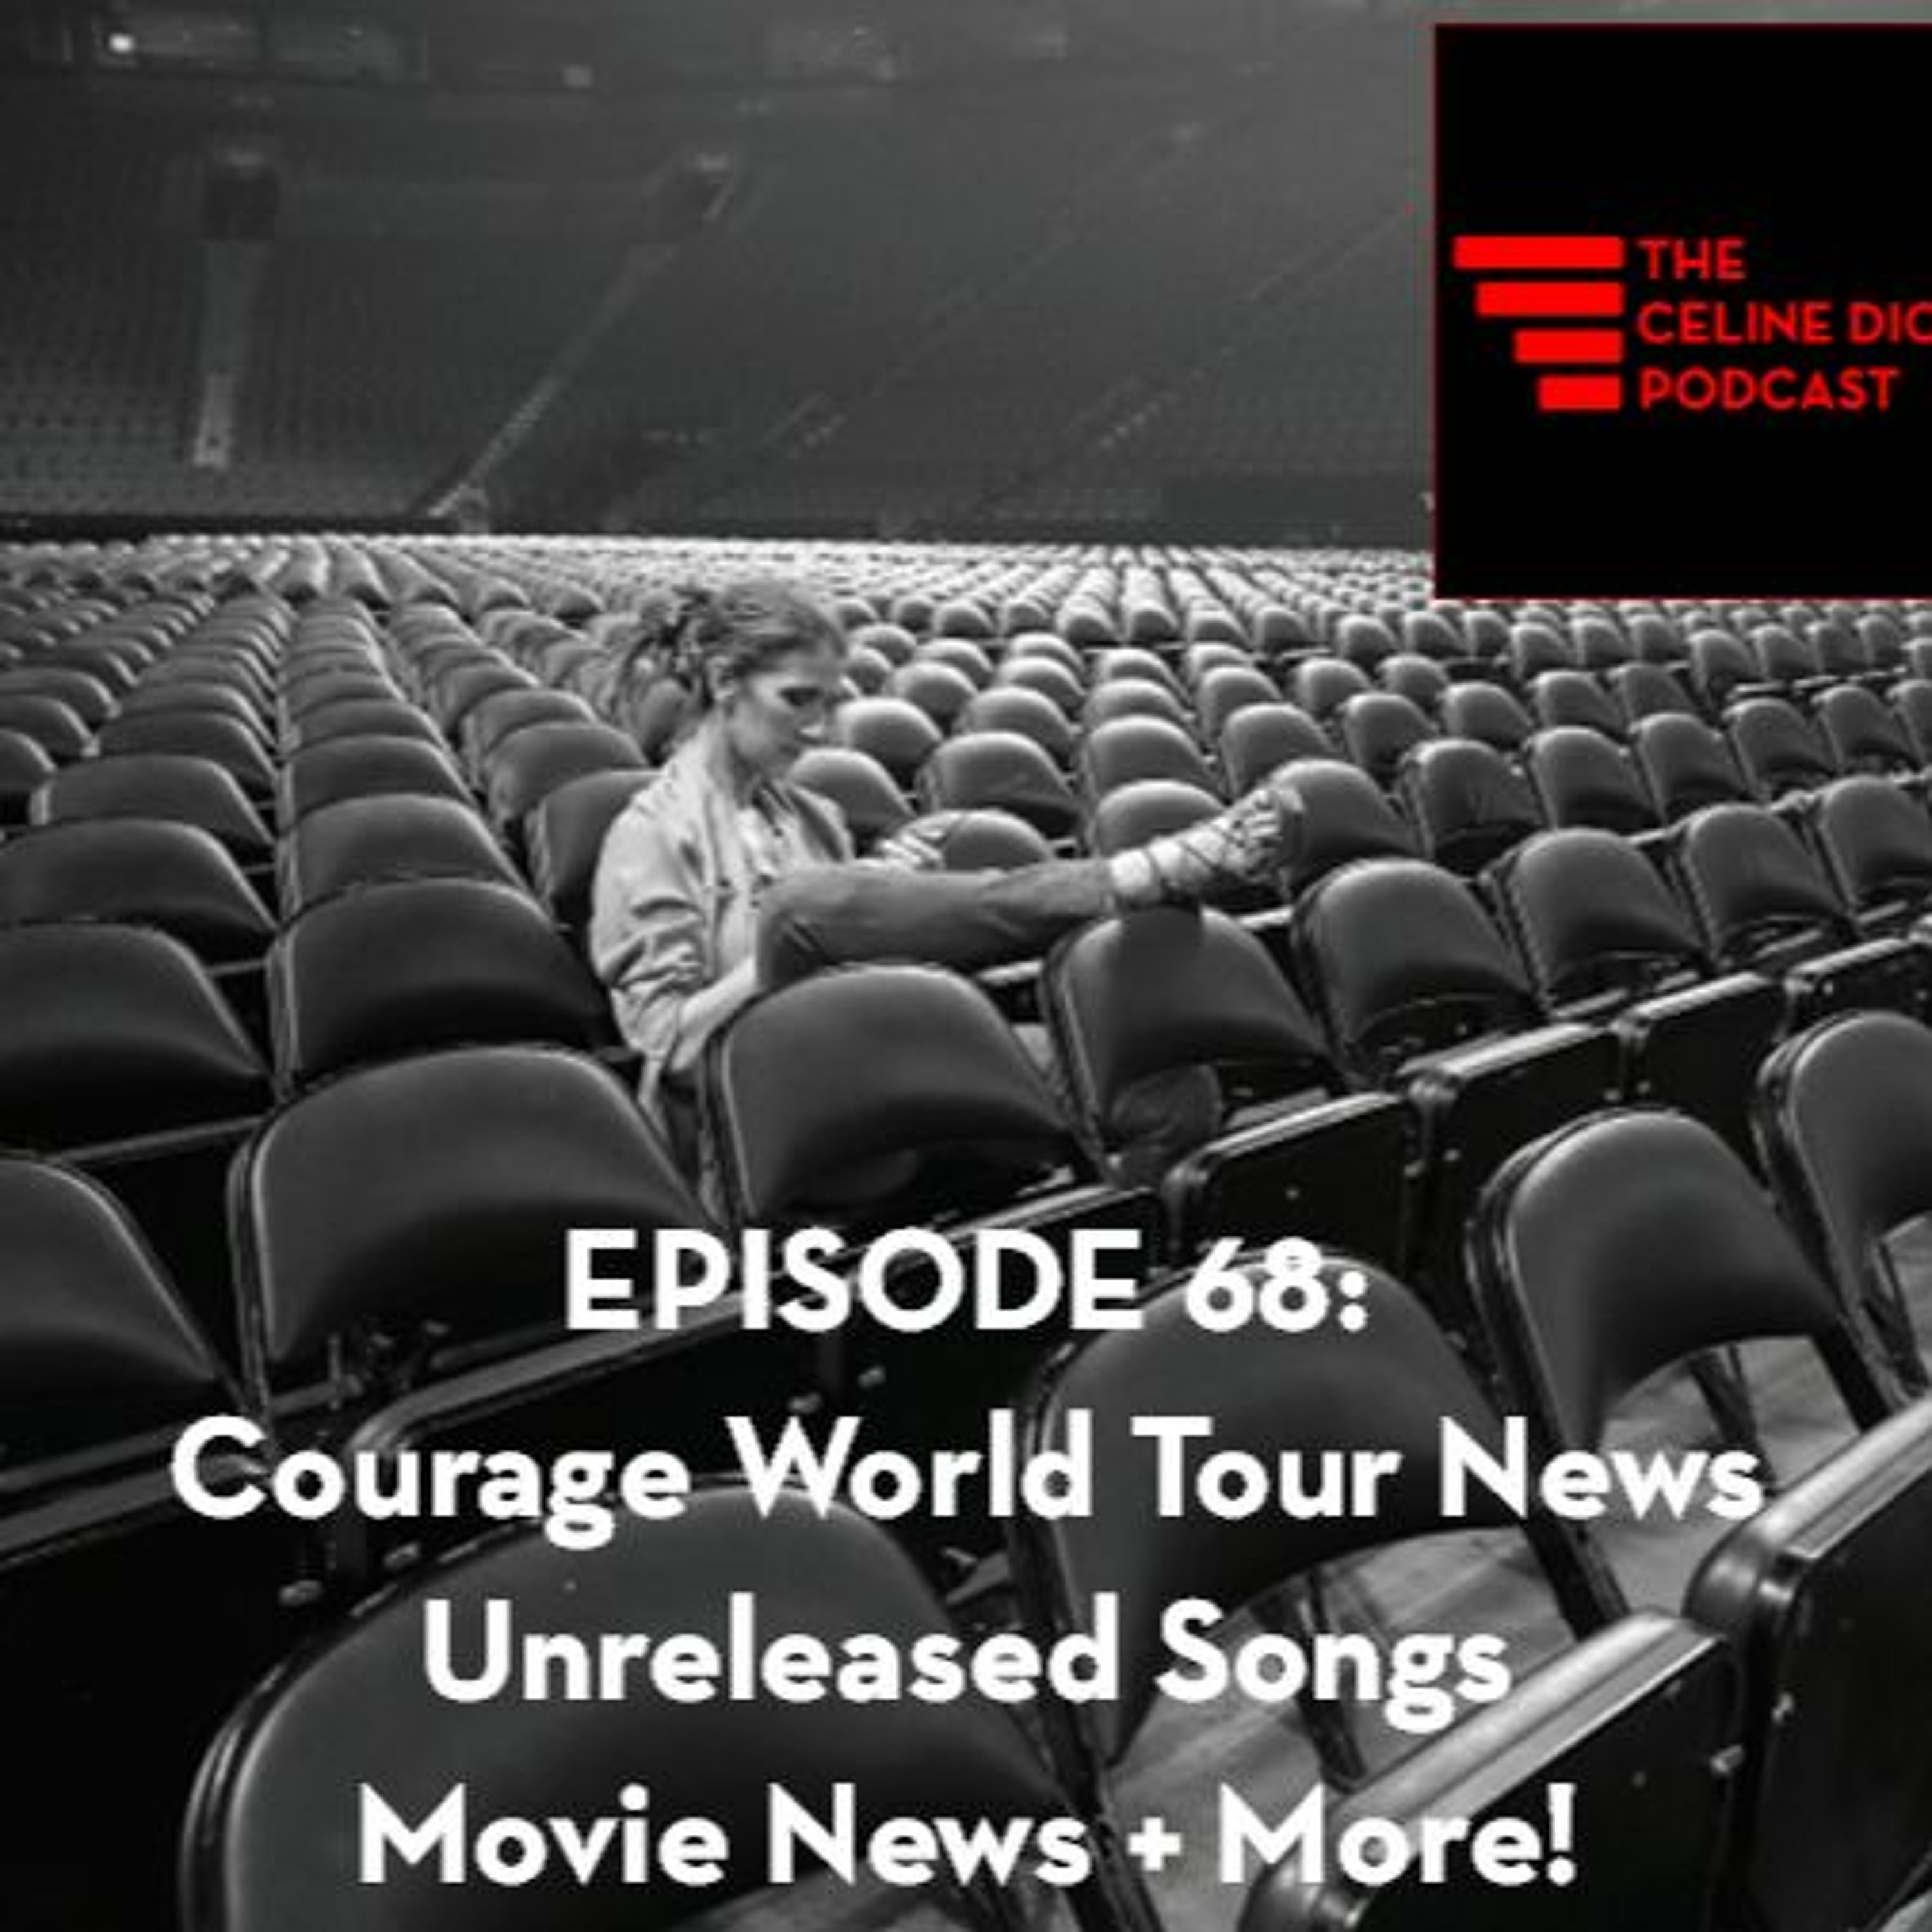 The Celine Dion Podcast Ep68: Courage World Tour moved to 2023!